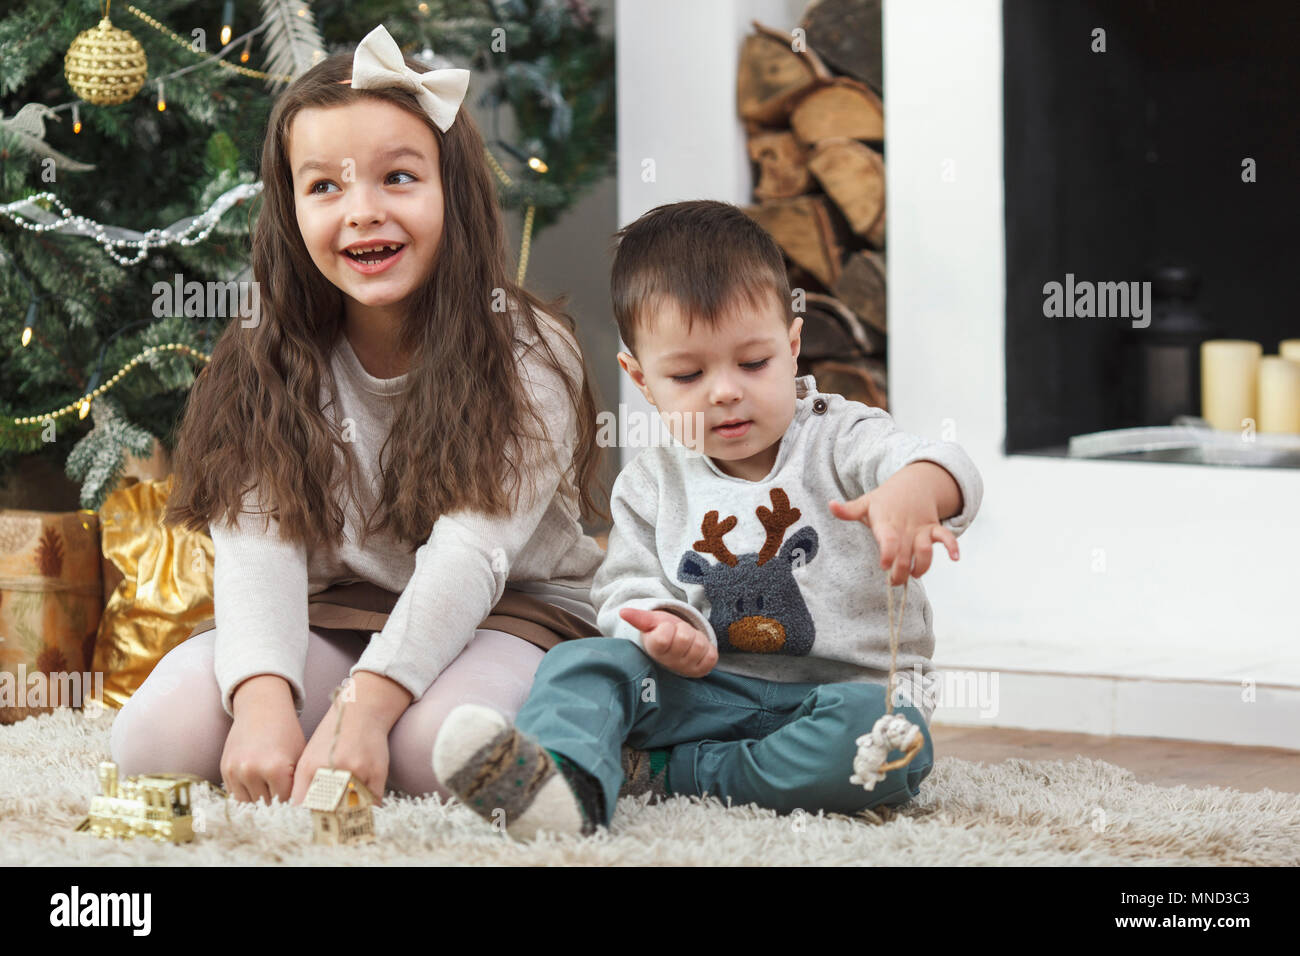 Cheerful girl sitting by brother on rug at home Stock Photo